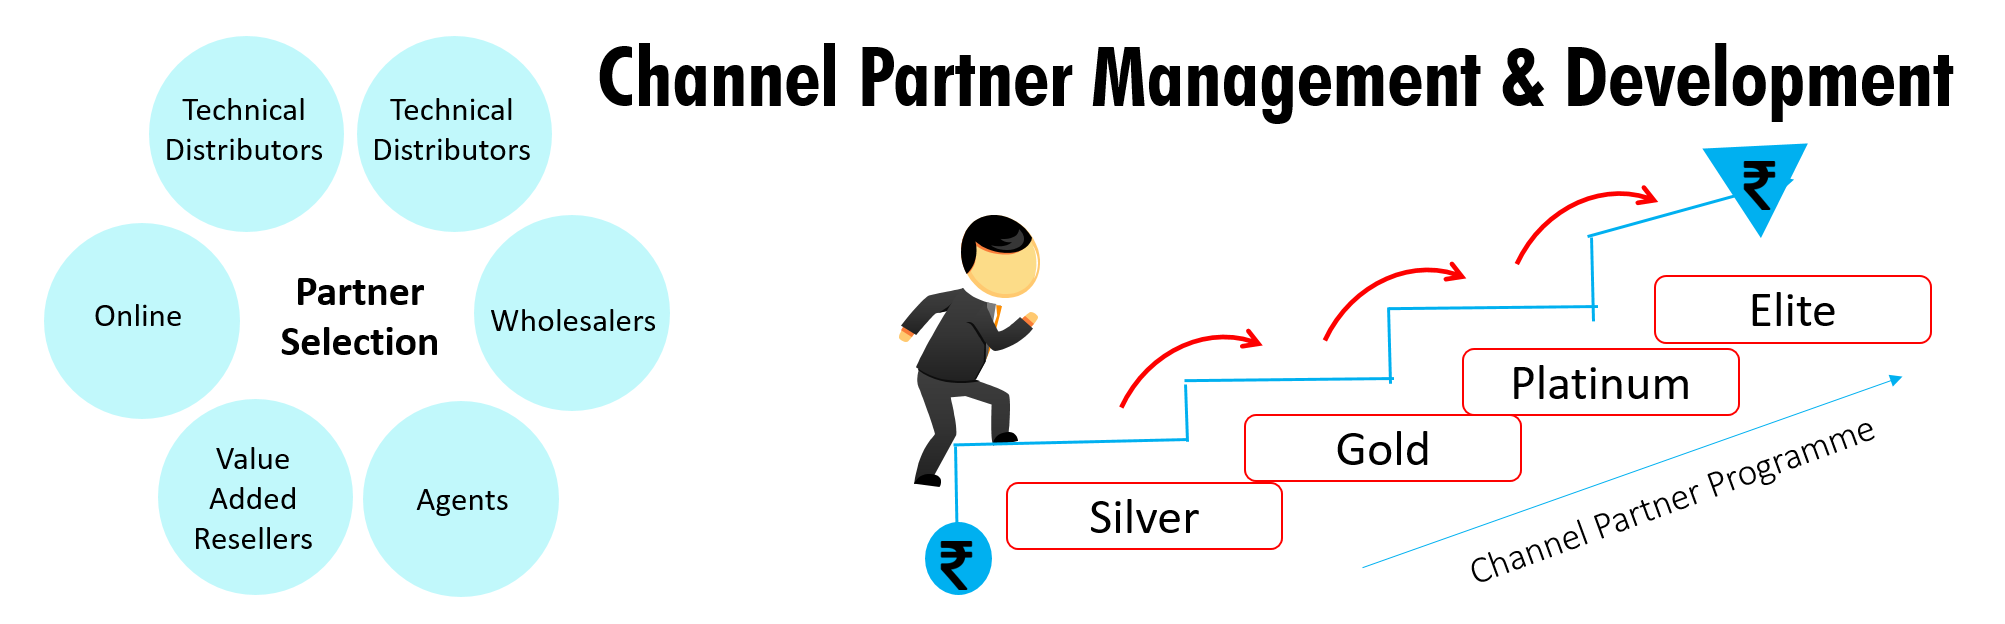 What with a partner answer. Partners channel. Performance Management картинка. Partners — партнер маркетинг модель. Developing Management.